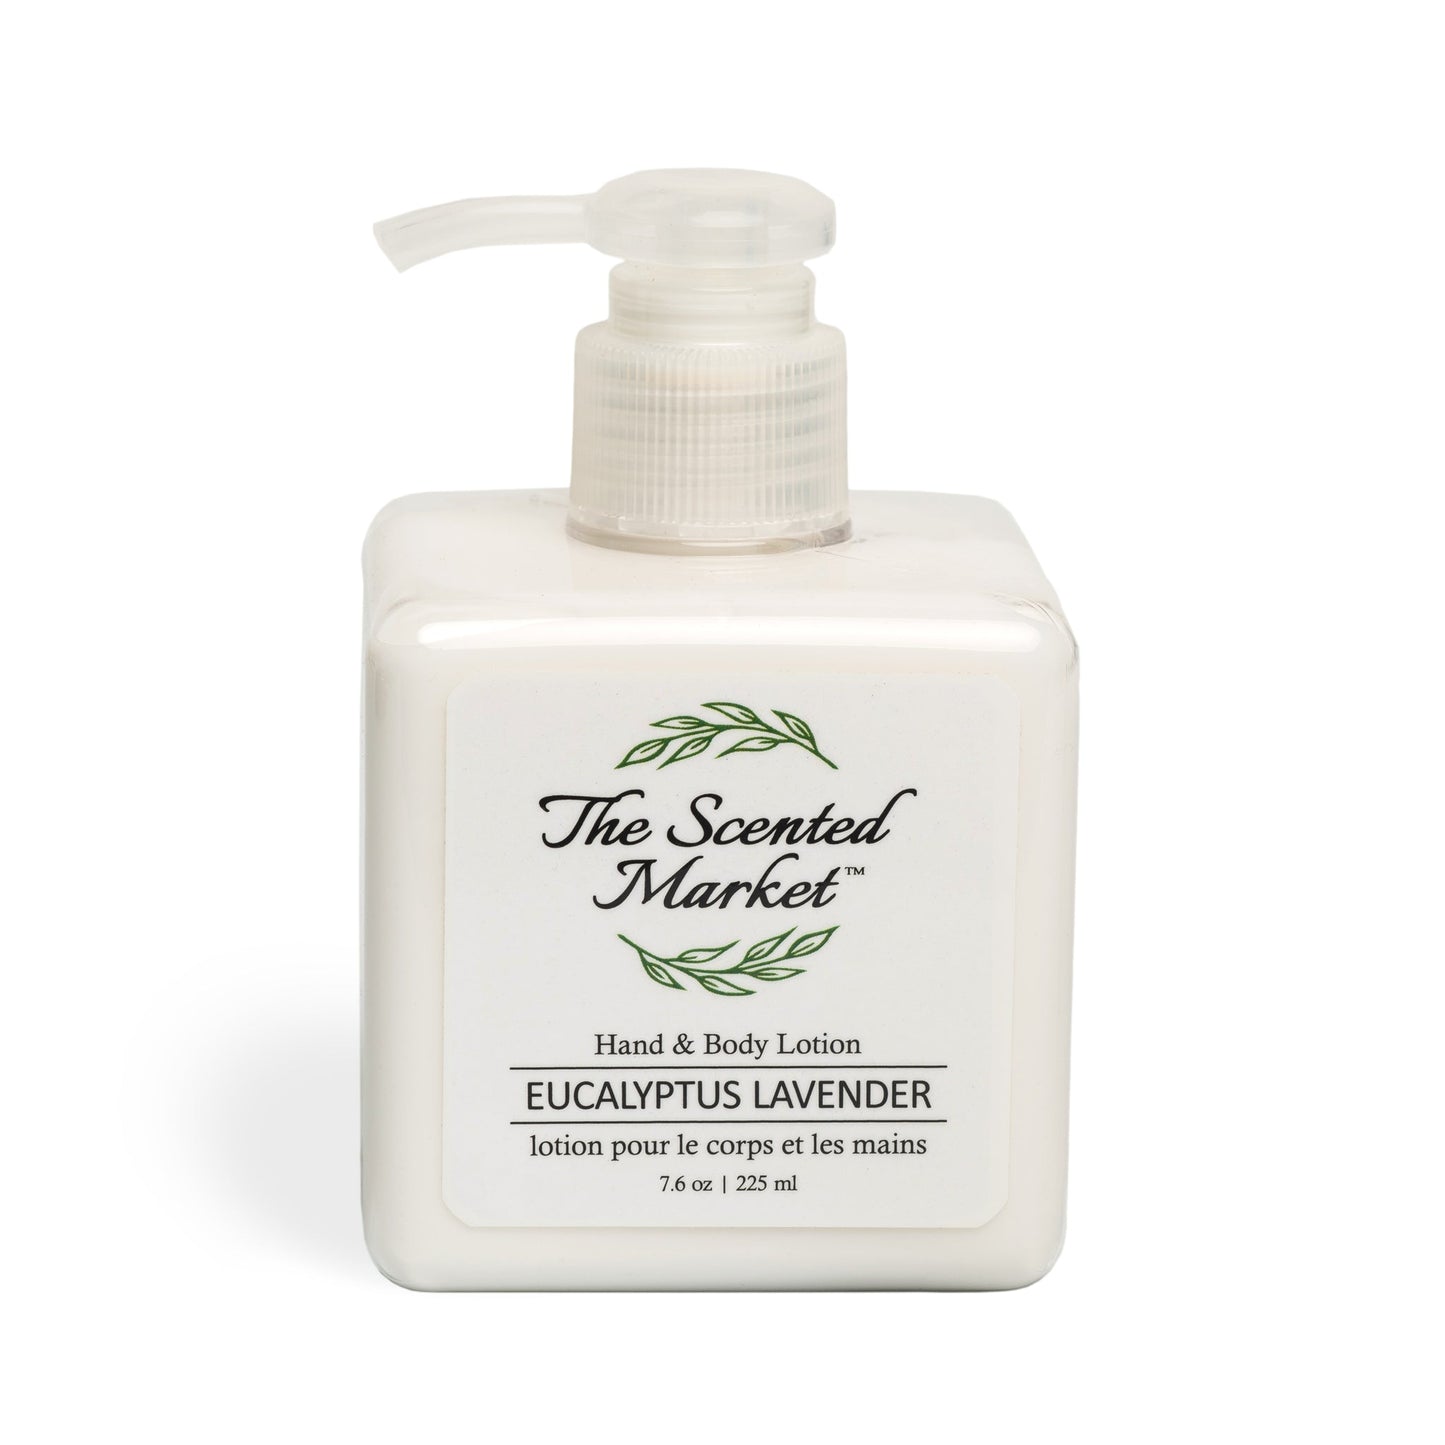 The Scented Market Hand & Body Lotion Eucalyptus Lavender 225mL